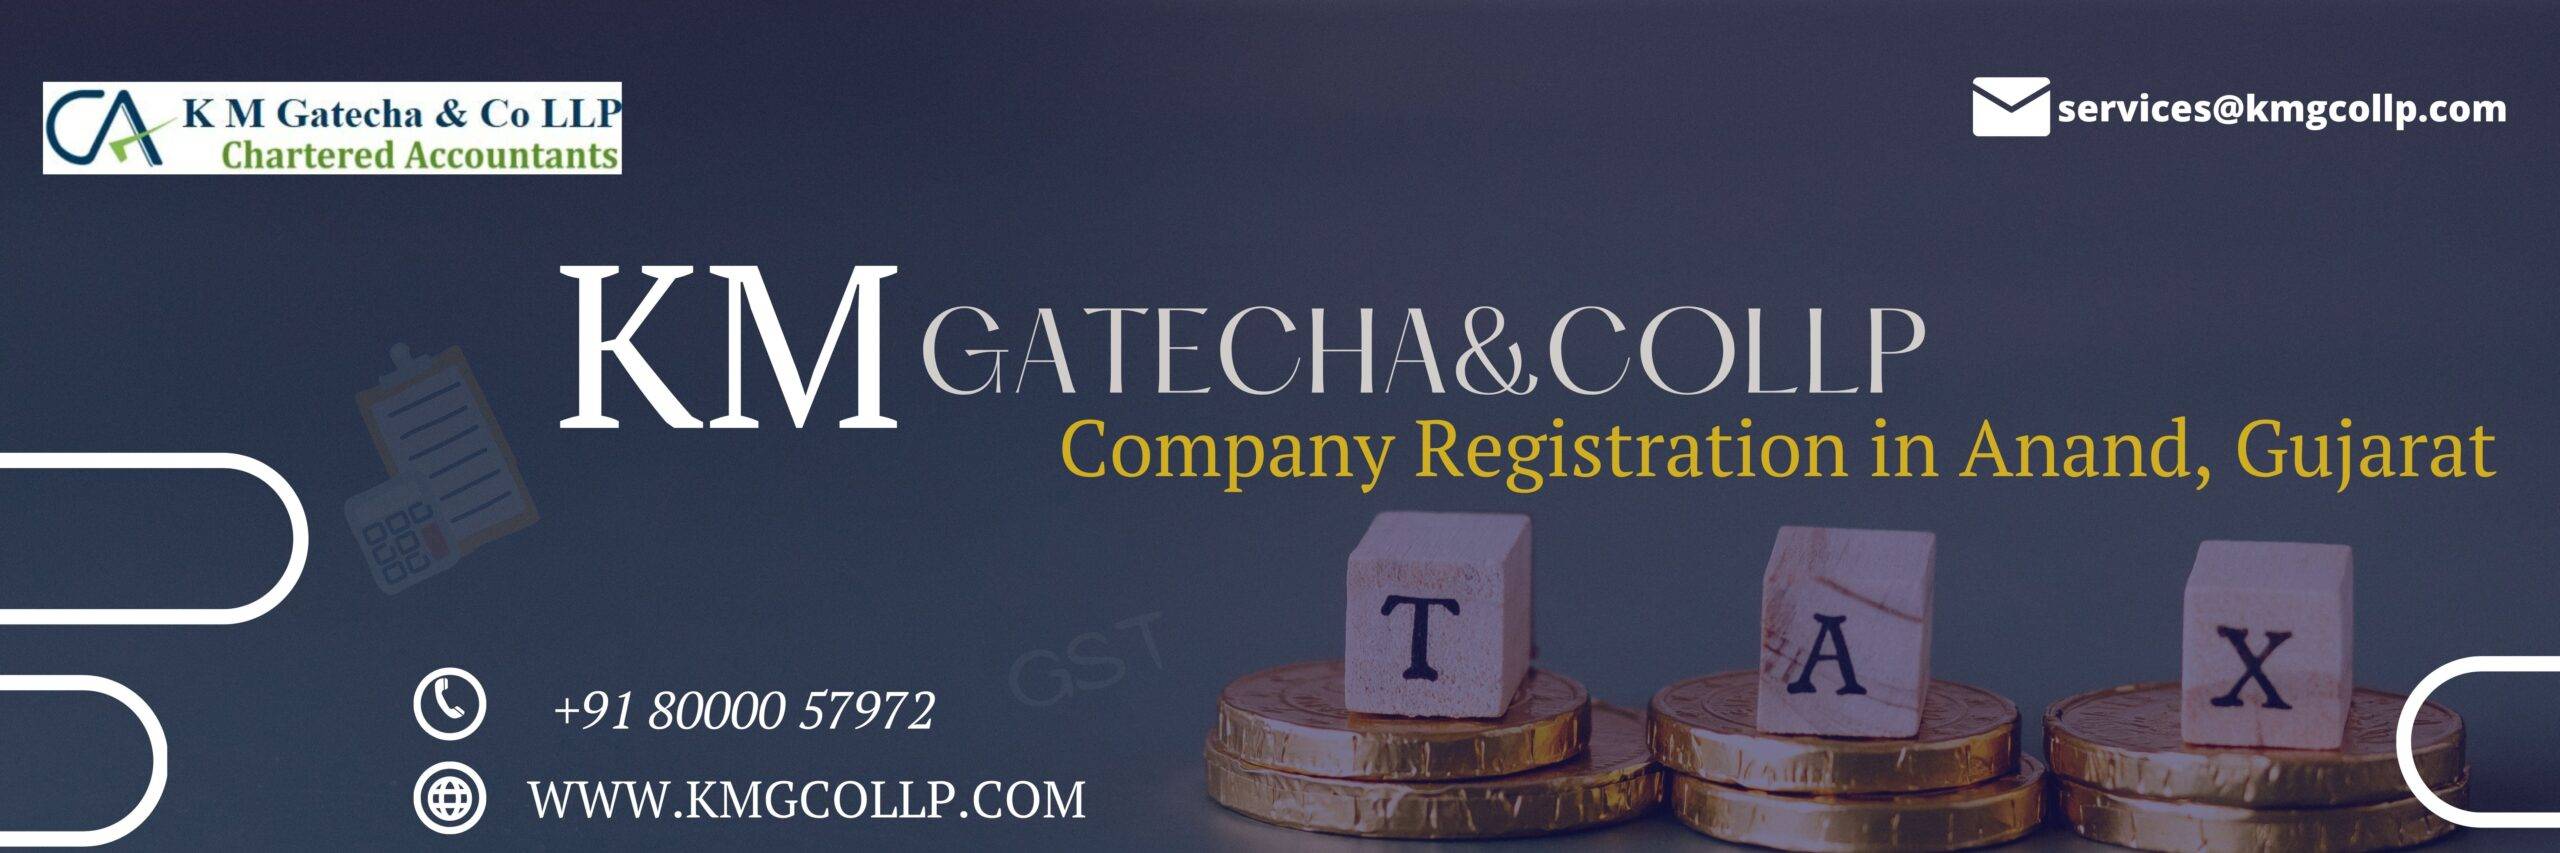 Company Registration in Anand